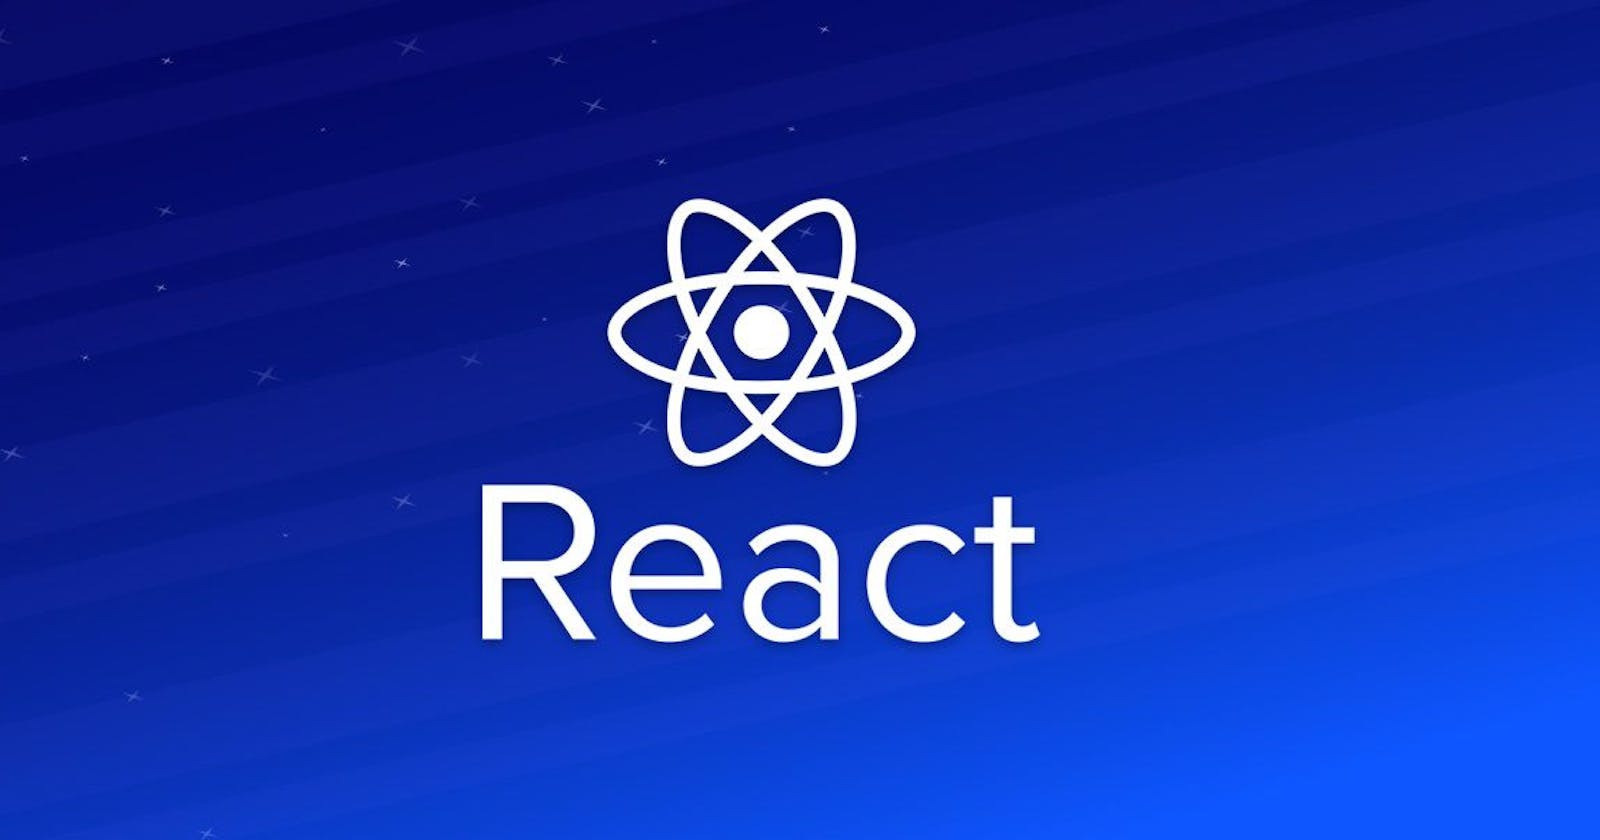 How To Learn ReactJS in 2021